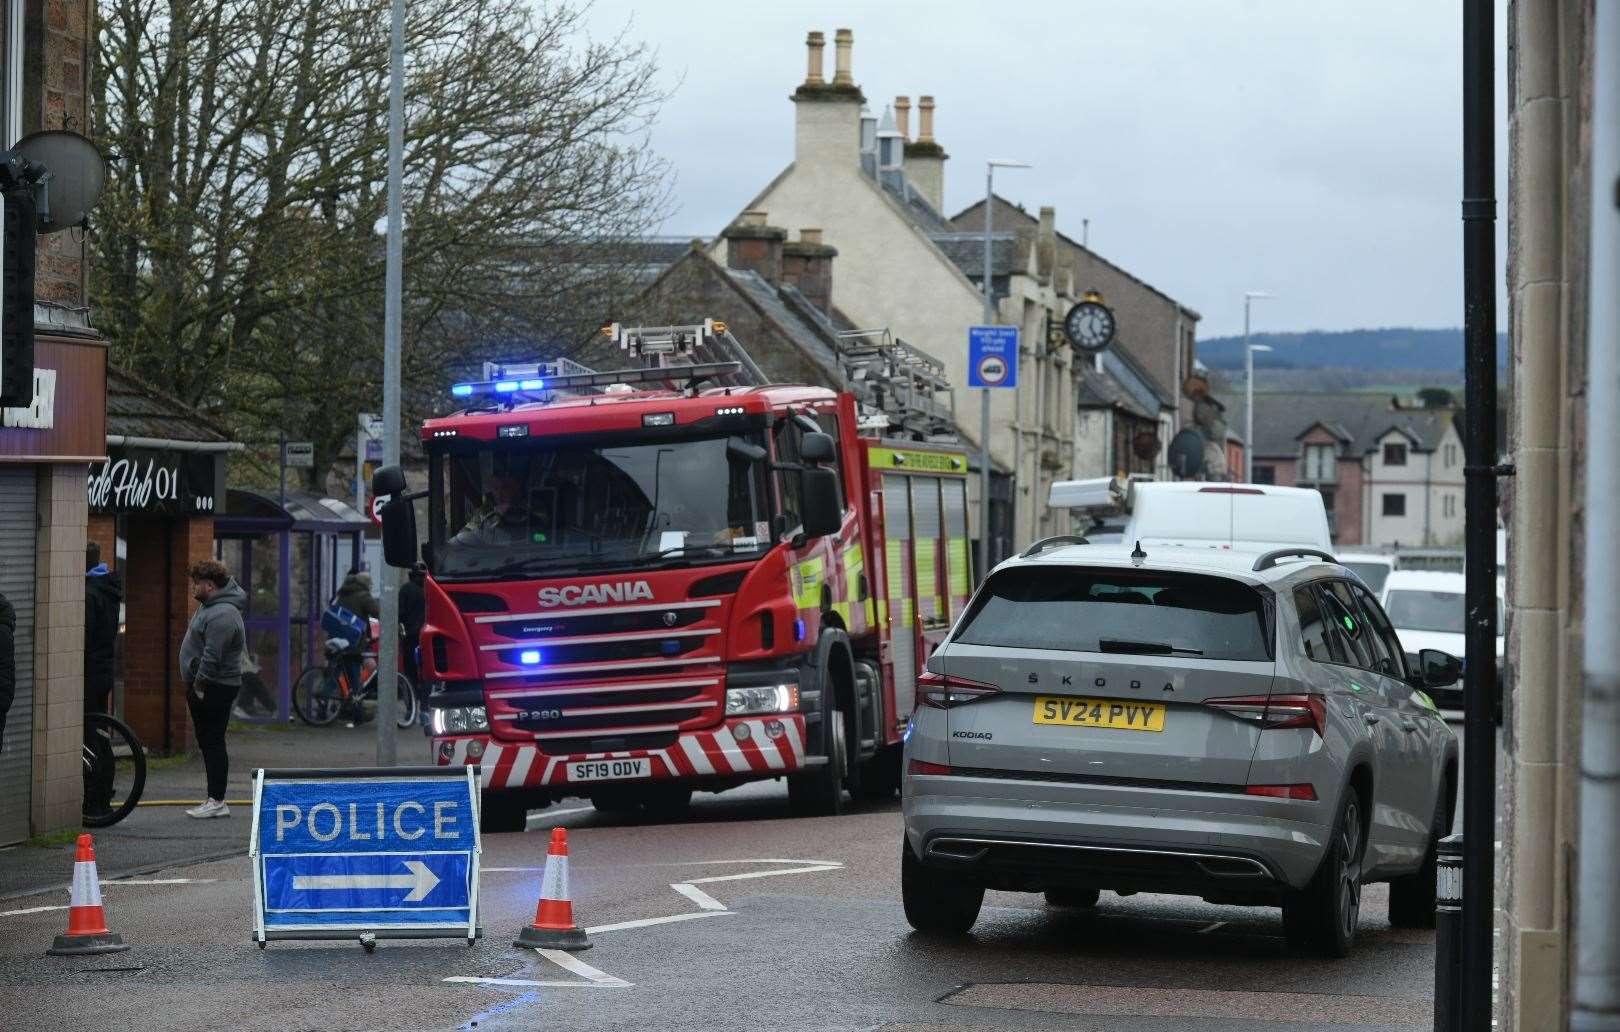 Fire appliance and police sign. PICTURE: JAMES MACKENZIE